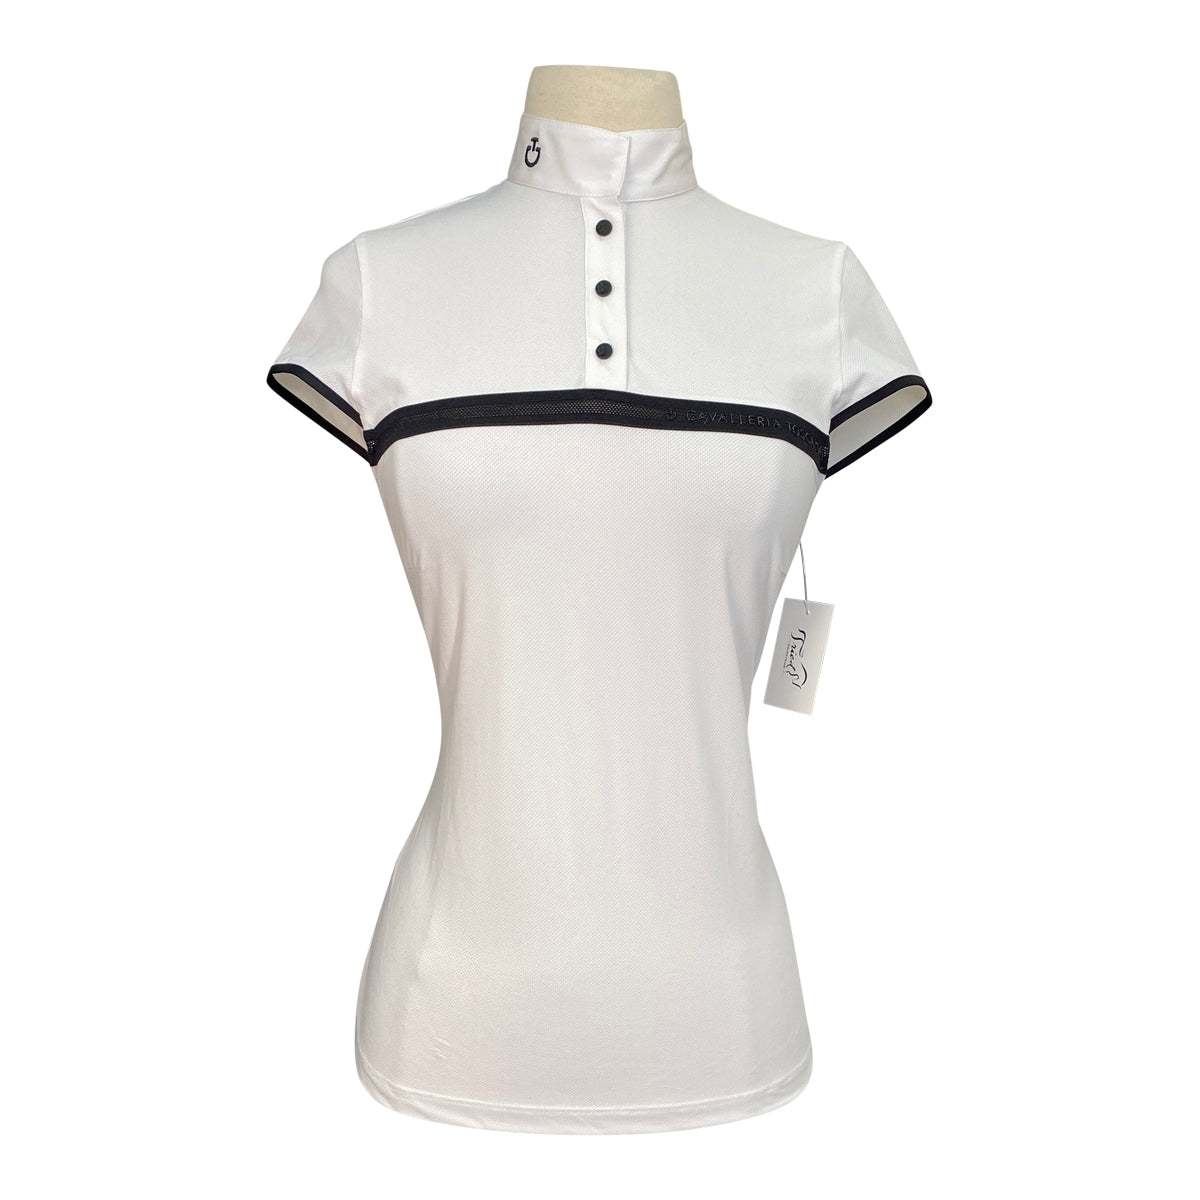 Cavalleria Toscana Jersey Mesh S/S Competition Shirt w/ Logo Tape in White